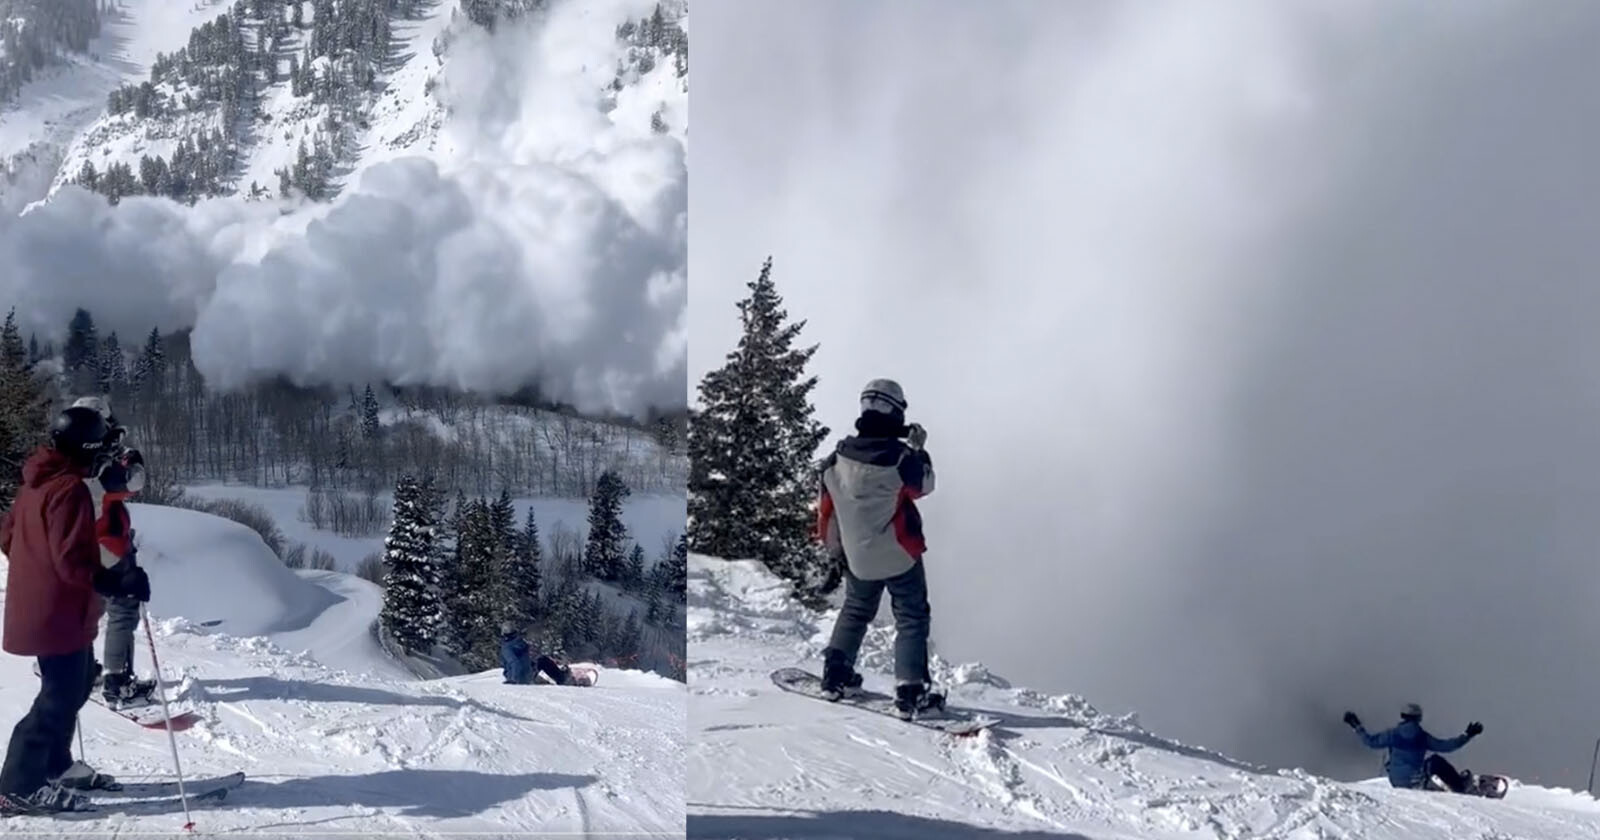  wild footage enormous powder cloud avalanche engulfing skiers 